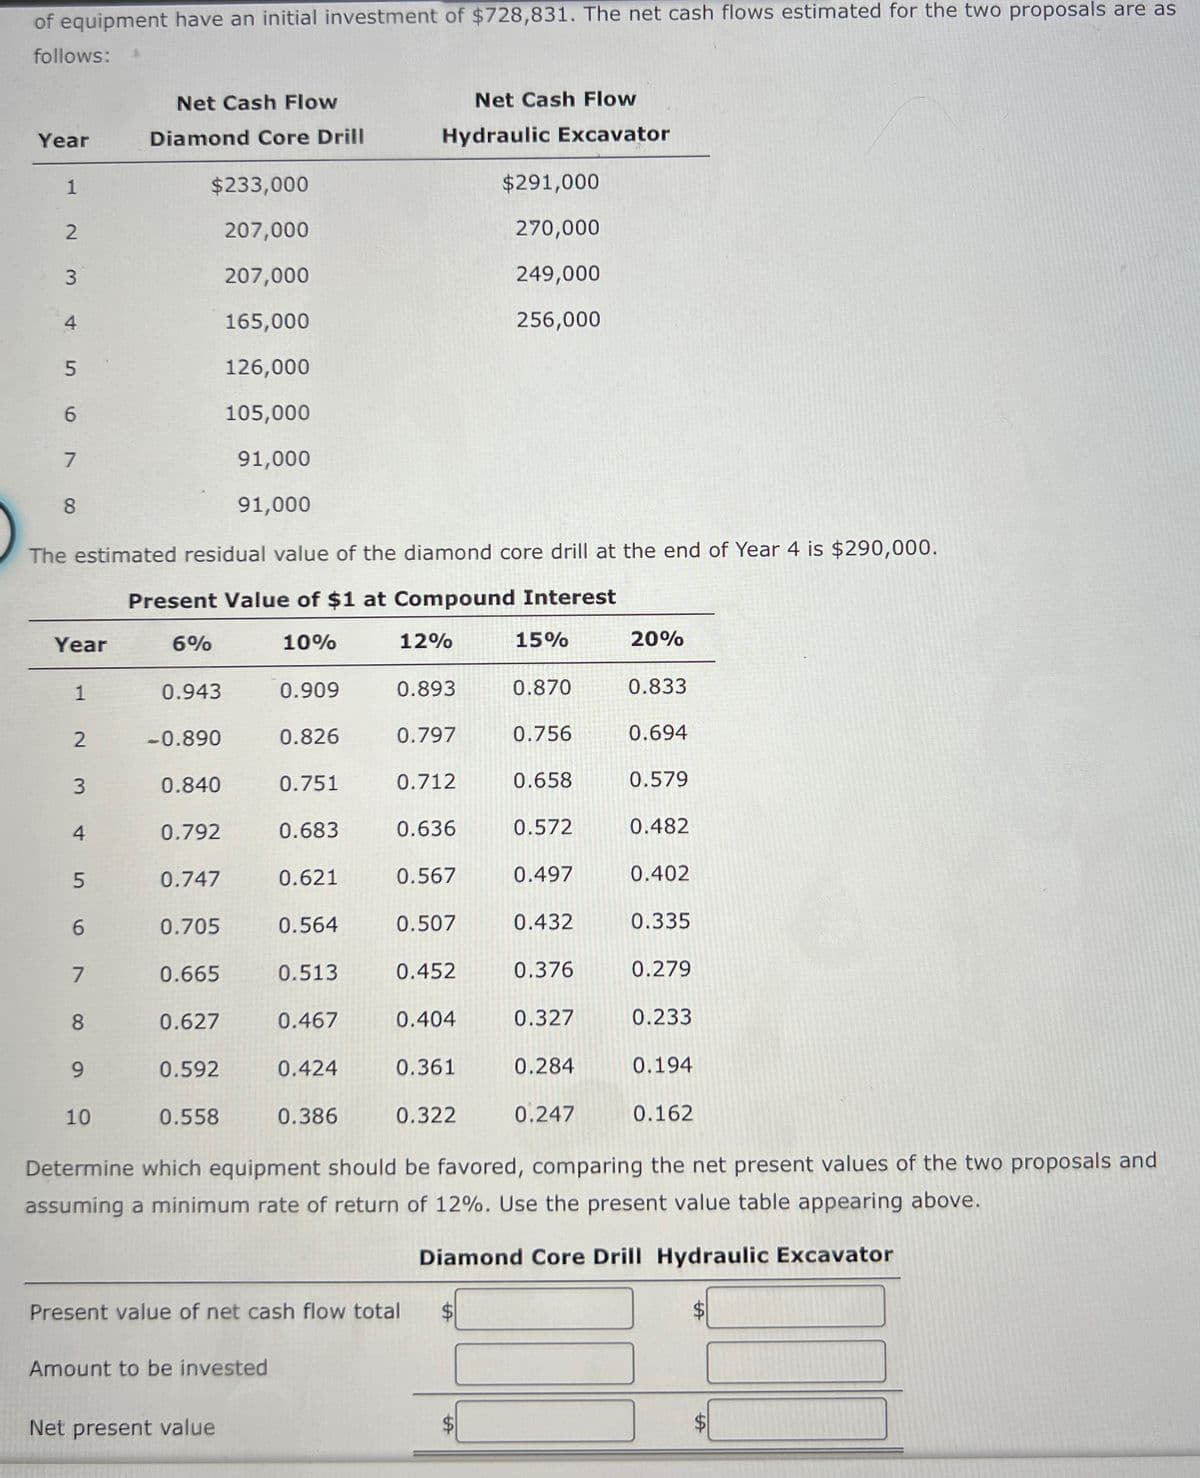 of equipment have an initial investment of $728,831. The net cash flows estimated for the two proposals are as
follows:
Net Cash Flow
Net Cash Flow
Year
Diamond Core Drill
Hydraulic Excavator
1
$233,000
$291,000
23 4569
207,000
270,000
207,000
249,000
165,000
256,000
126,000
7
8
105,000
91,000
91,000
The estimated residual value of the diamond core drill at the end of Year 4 is $290,000.
Present Value of $1 at Compound Interest
Year
6%
10%
12%
15%
20%
1
0.943
0.909
0.893
0.870
0.833
2
-0.890
0.826
0.797
0.756
0.694
3
0.840
0.751
0.712
0.658
0.579
7
45 65
0.792
0.683
0.636
0.572
0.482
0.747
0.621
0.567
0.497
0.402
0.705
0.564
0.507
0.432
0.335
0.665
0.513
0.452
0.376
0.279
8
0.627
0.467
0.404
0.327
0.233
9
0.592
0.424
0.361
0.284
0.194
10
0.558
0.386
0.322
0.247
0.162
Determine which equipment should be favored, comparing the net present values of the two proposals and
assuming a minimum rate of return of 12%. Use the present value table appearing above.
Diamond Core Drill Hydraulic Excavator
$
Present value of net cash flow total
$
Amount to be invested
Net present value